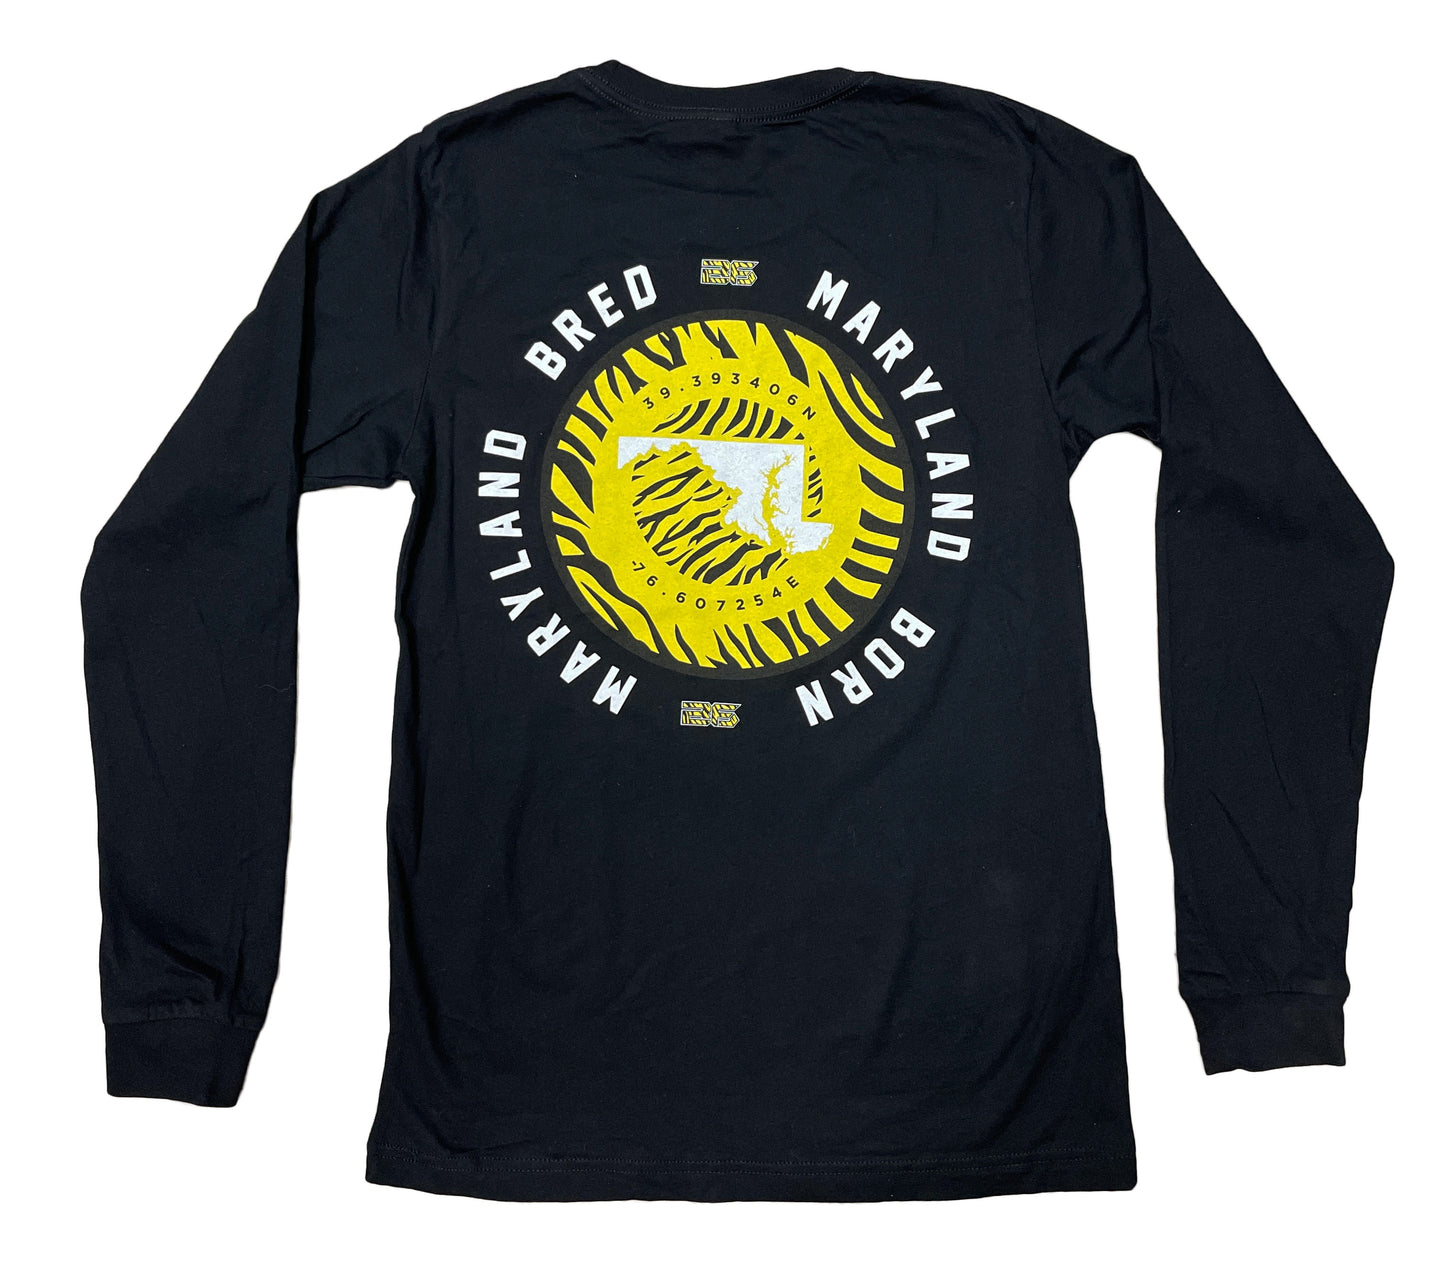 Bryce Frederick - Maryland Born, Maryland Bred Logo (Black) / Long Sleeve - Route One Apparel